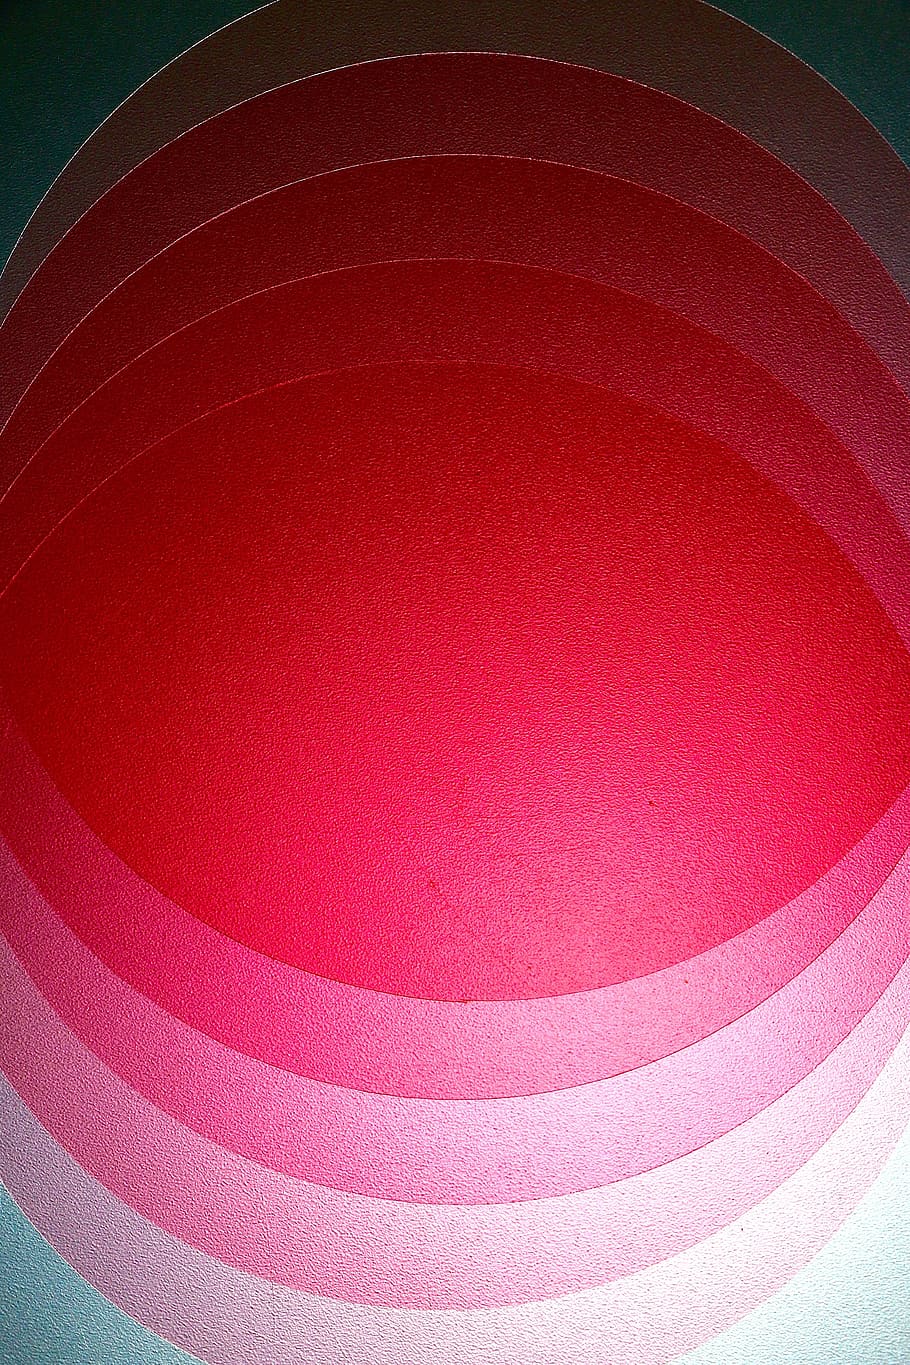 roundels, circle, overlapping, red, multi colored, close-up, paper, pattern, pink color, still life